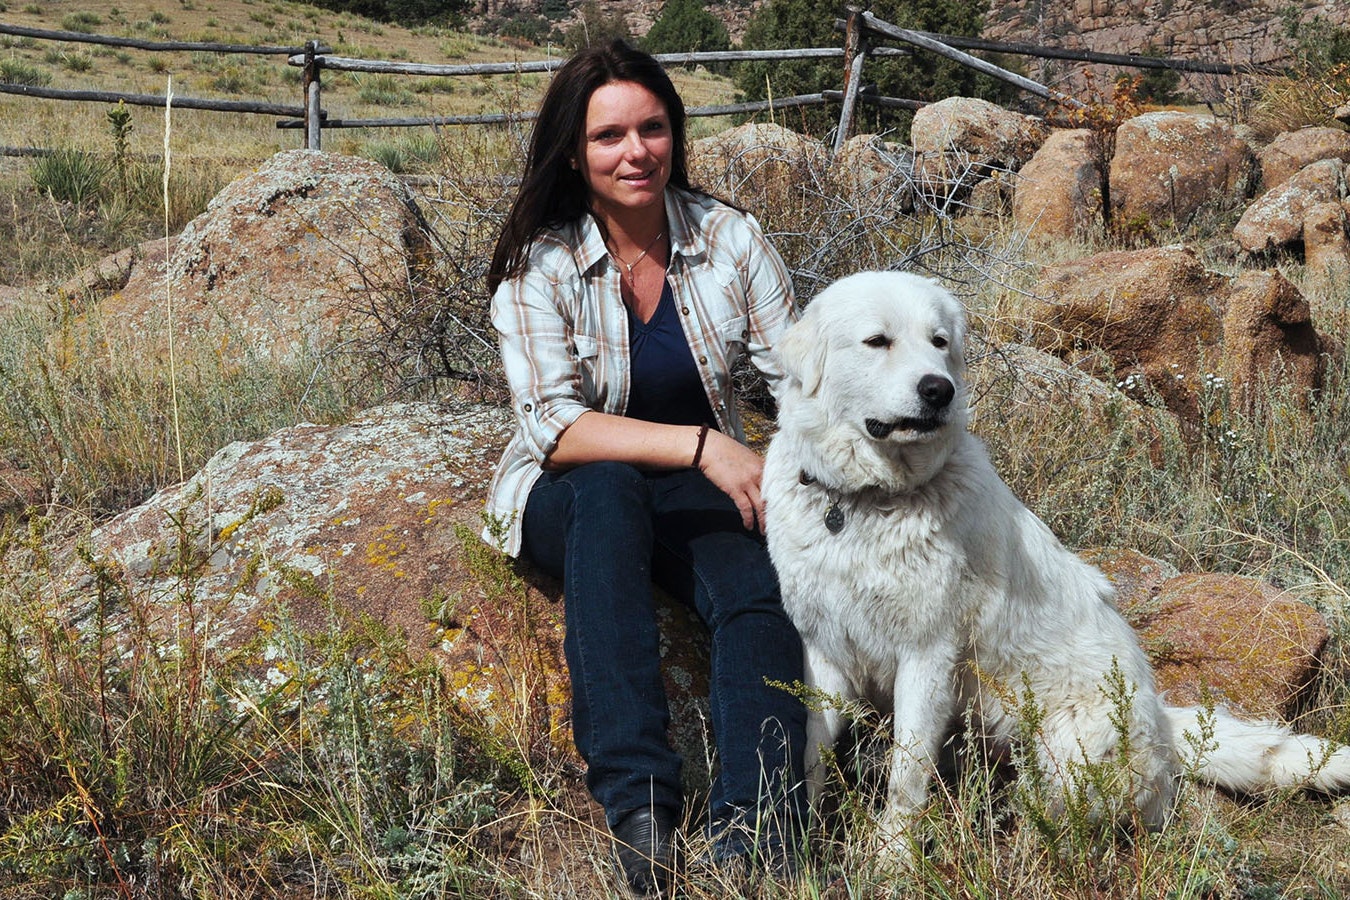 Longtime rancher Krisztina Gayler has used livestock guardian dogs to protect sheep and cattle on two continents.